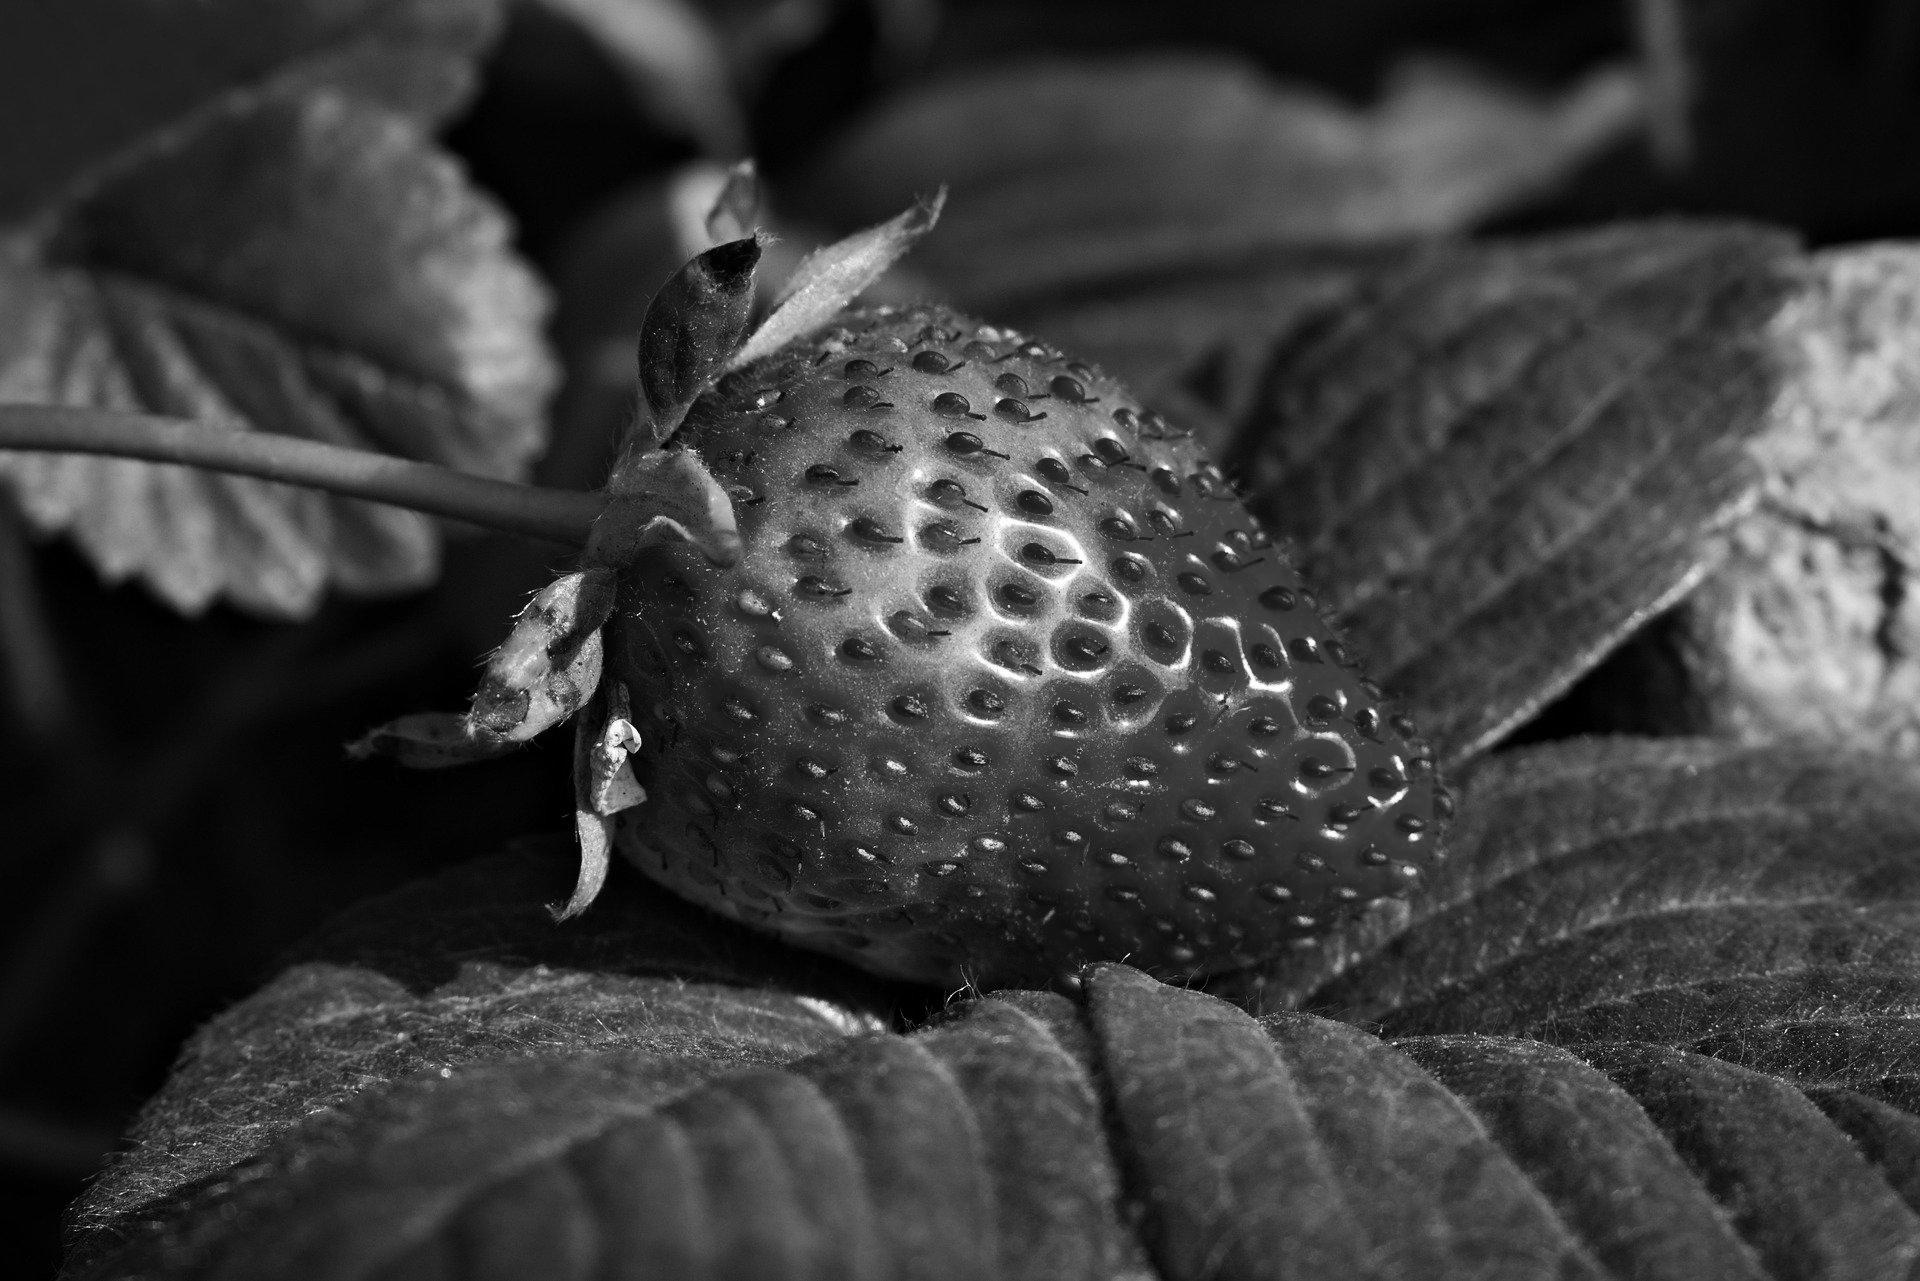 Strawberry image in grayscale for Python Pillow tutorial